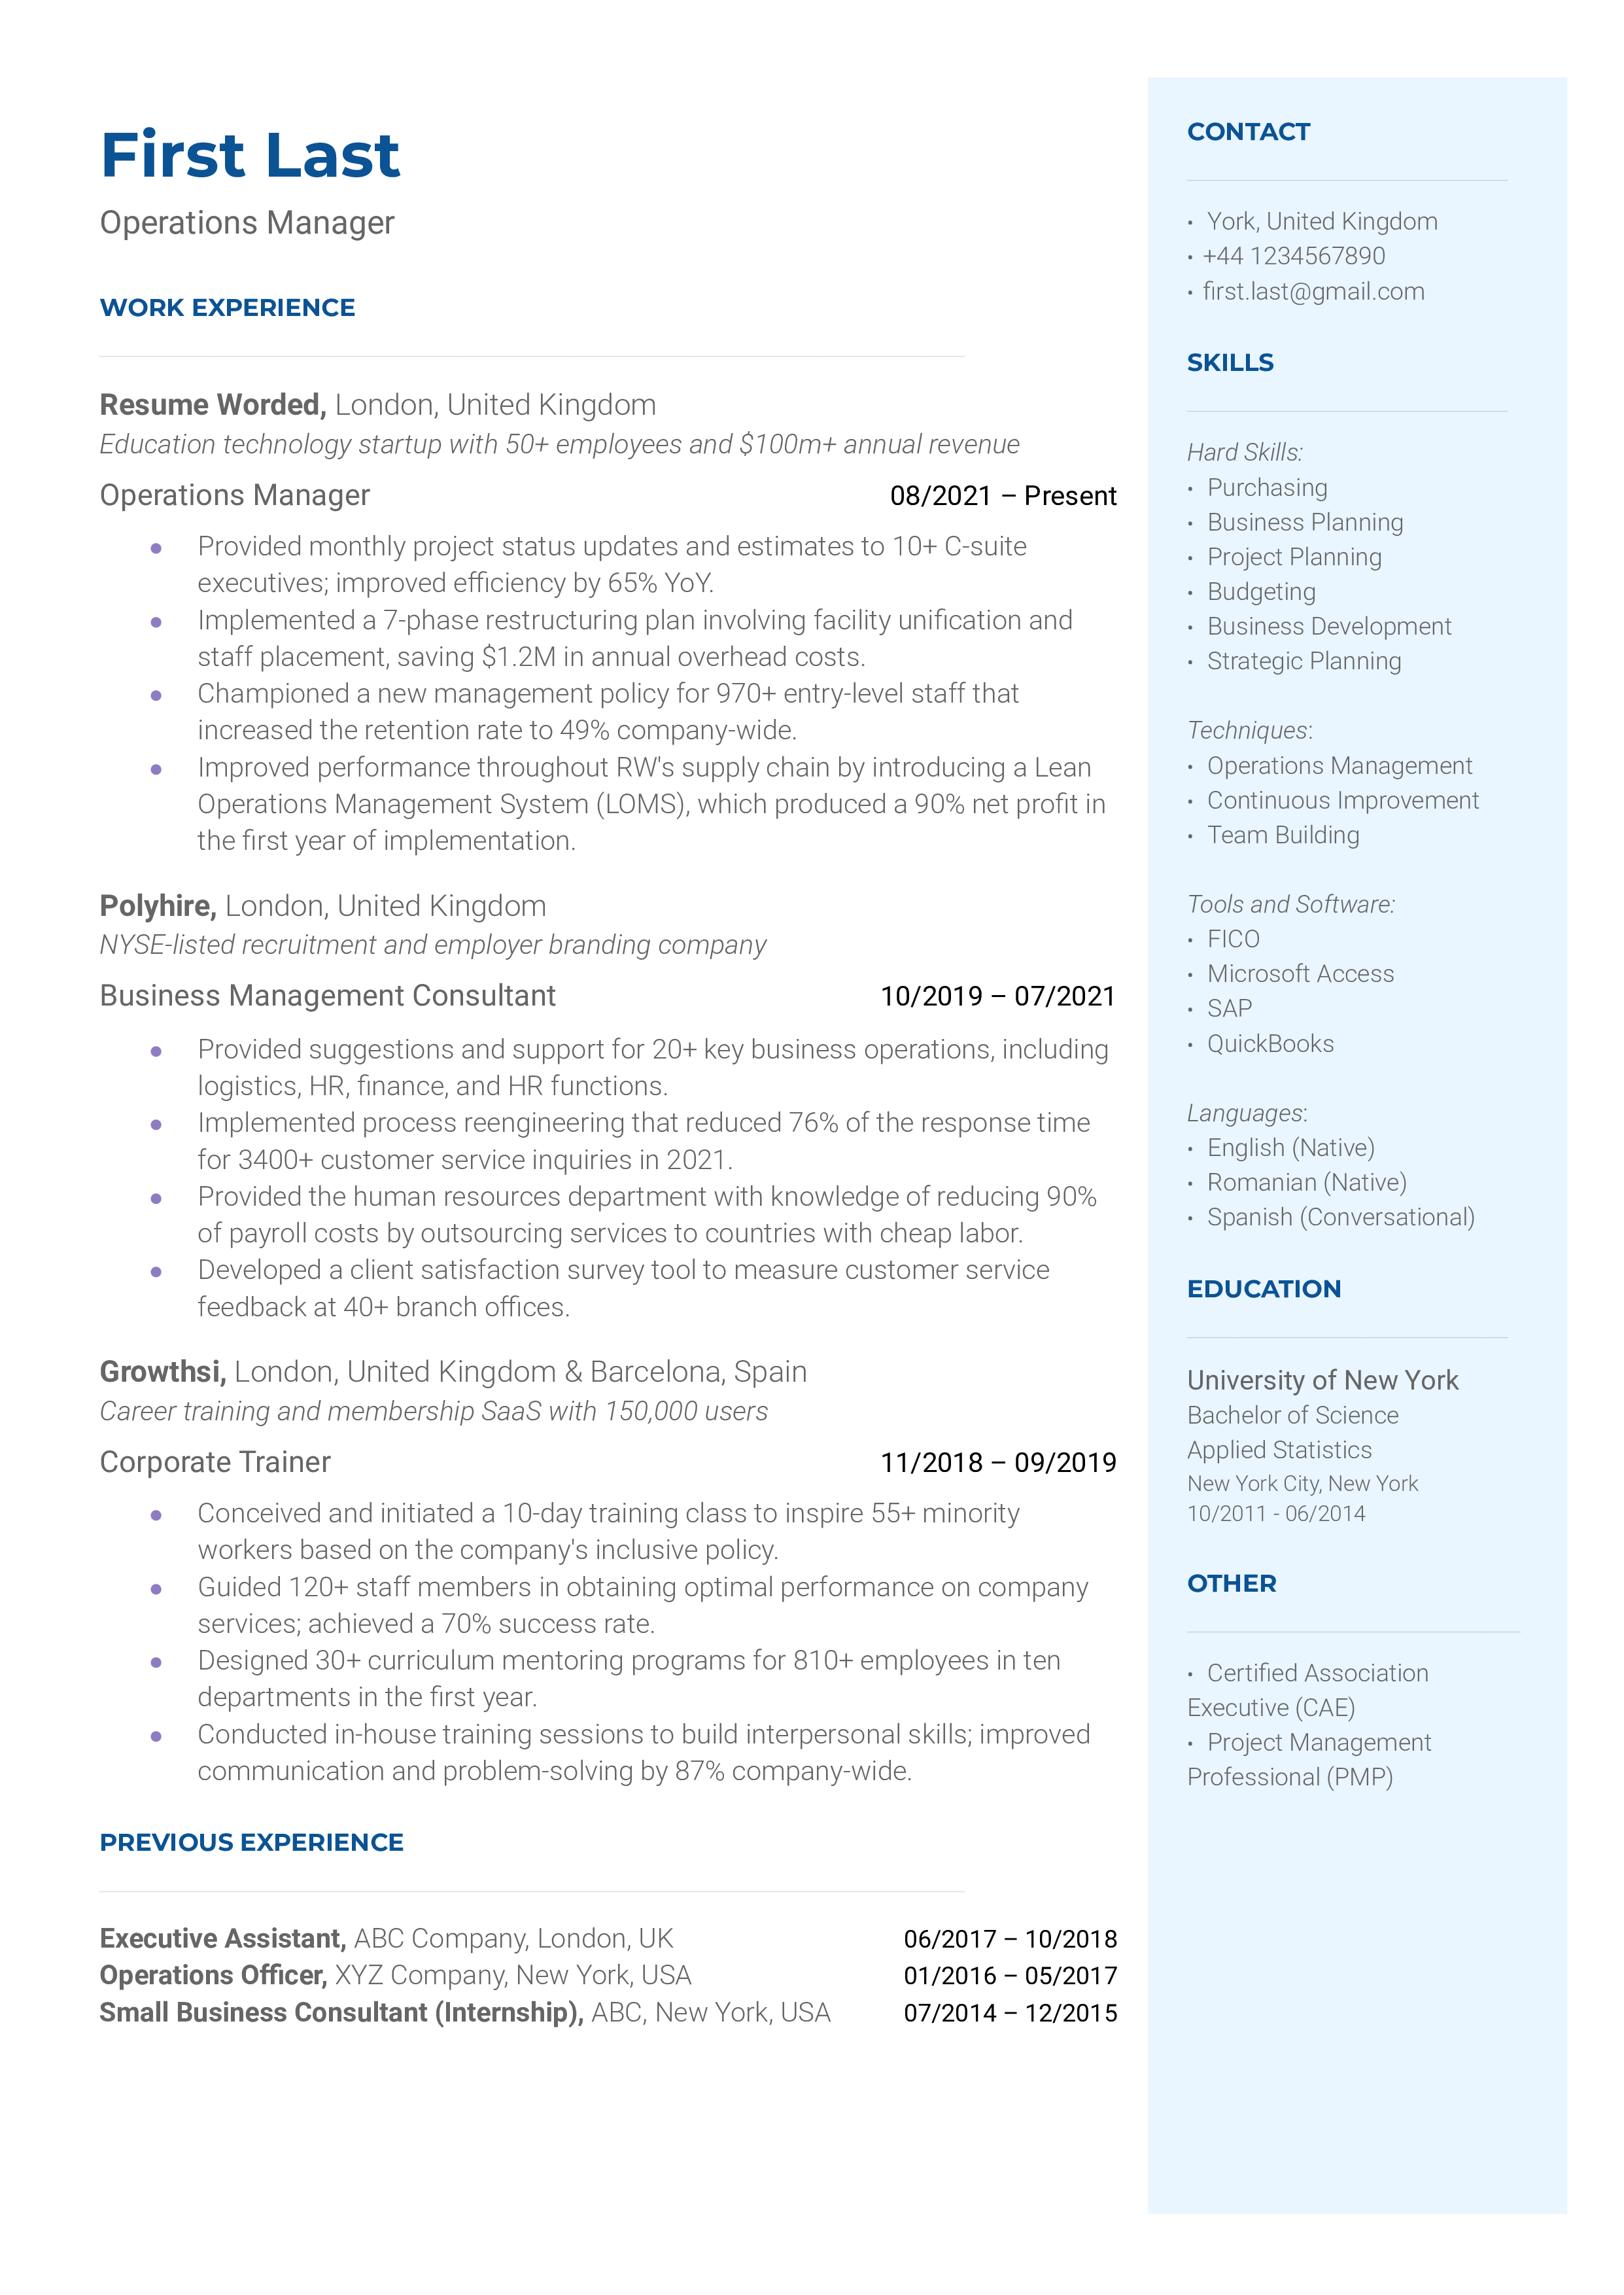 A CV exemplifying the skills and experience of an operations manager.